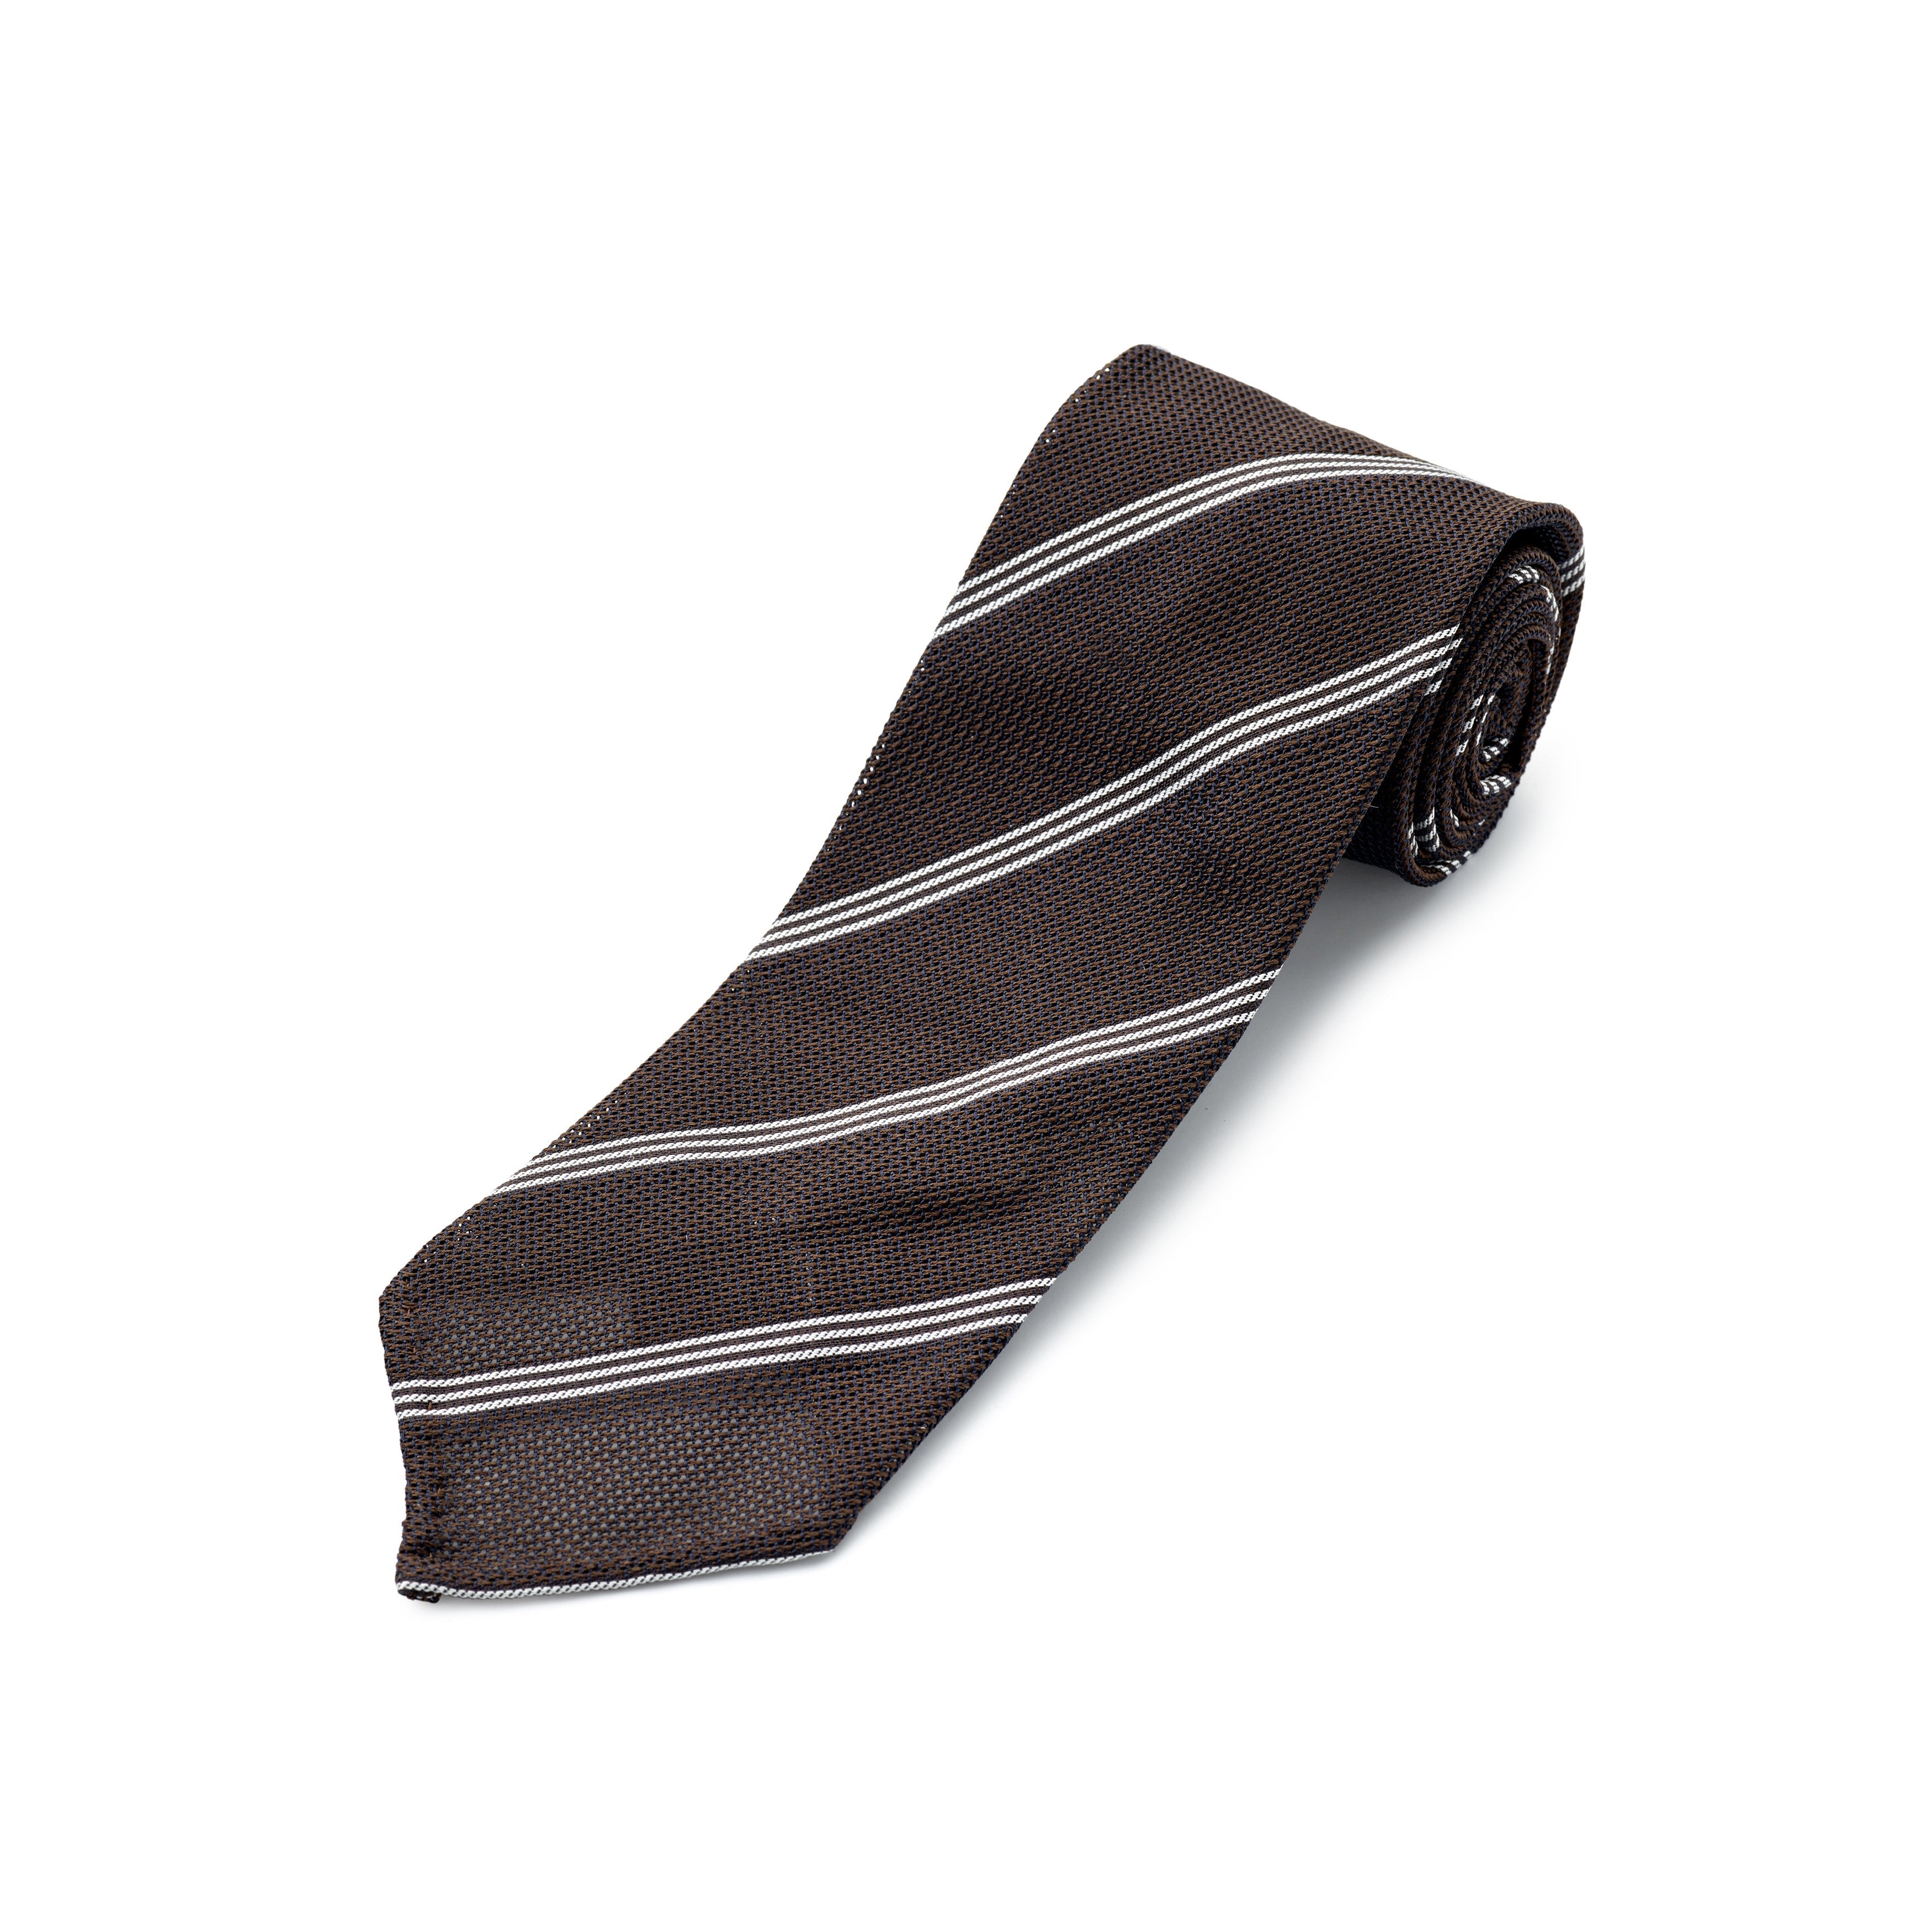 The Merchant Fox - Collection - Striped Ties